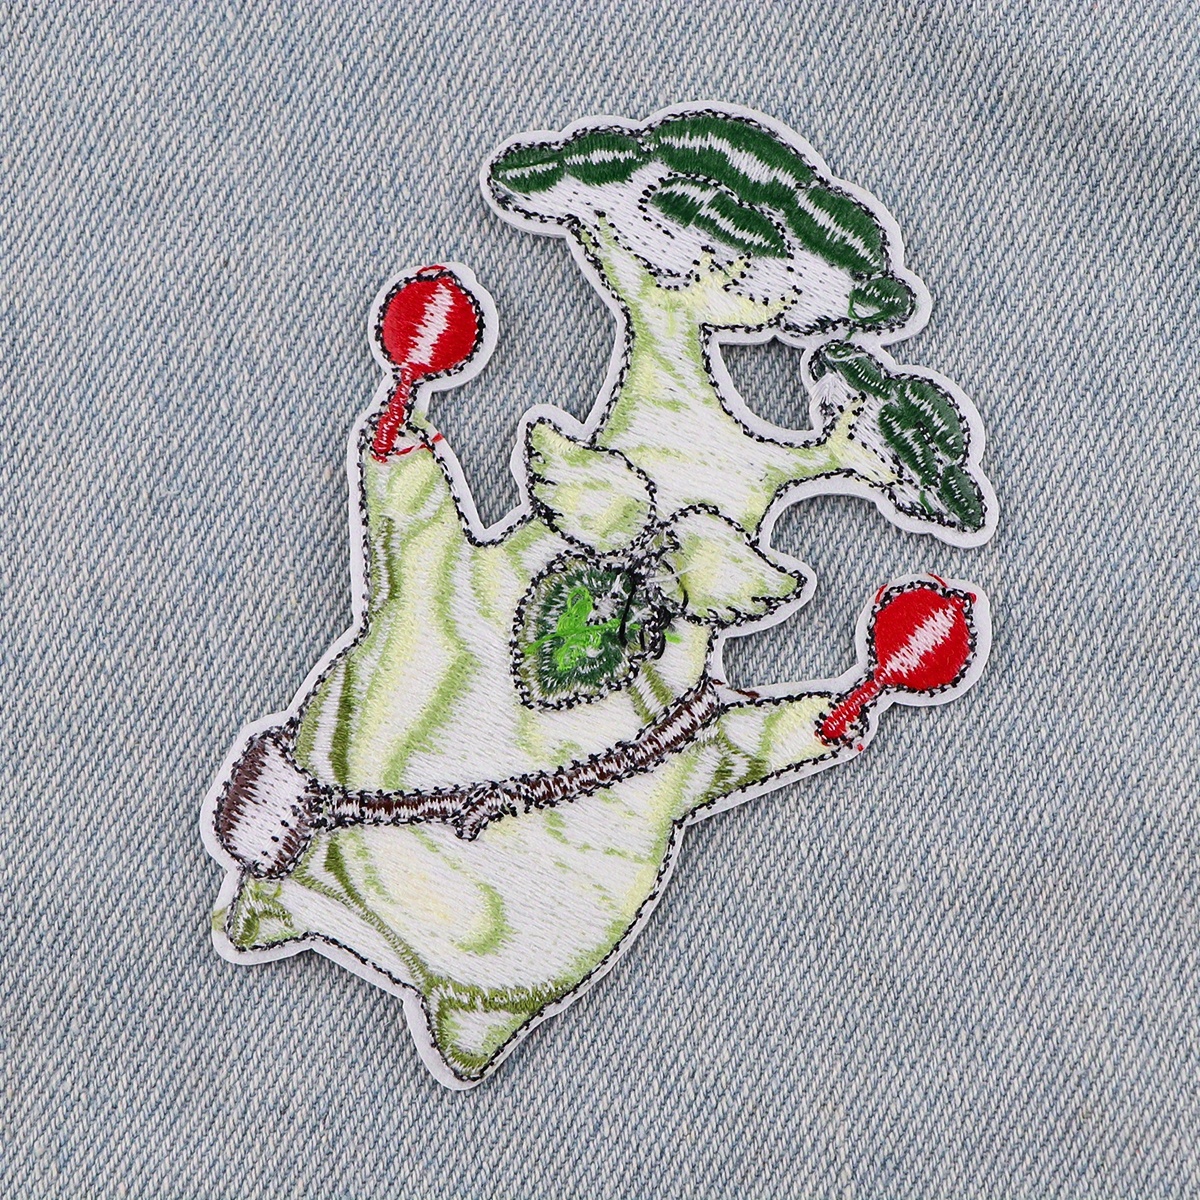 LARGE 4.5 x 4.3” Anime Embroidered IRON ON / SEW ON Appliqué PATCH